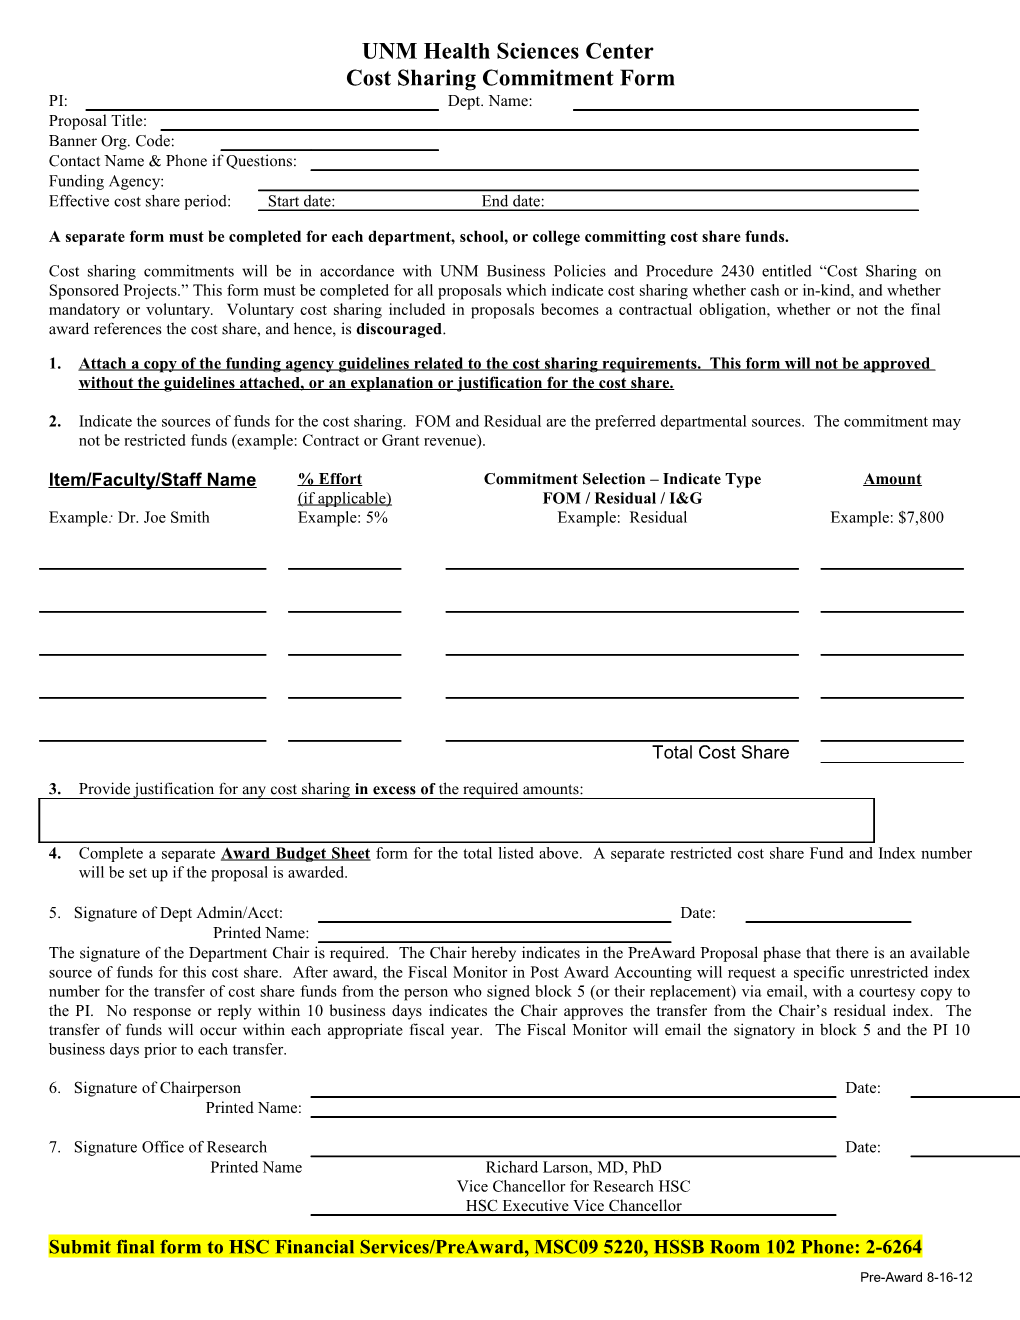 Cost Sharing Commitment Form